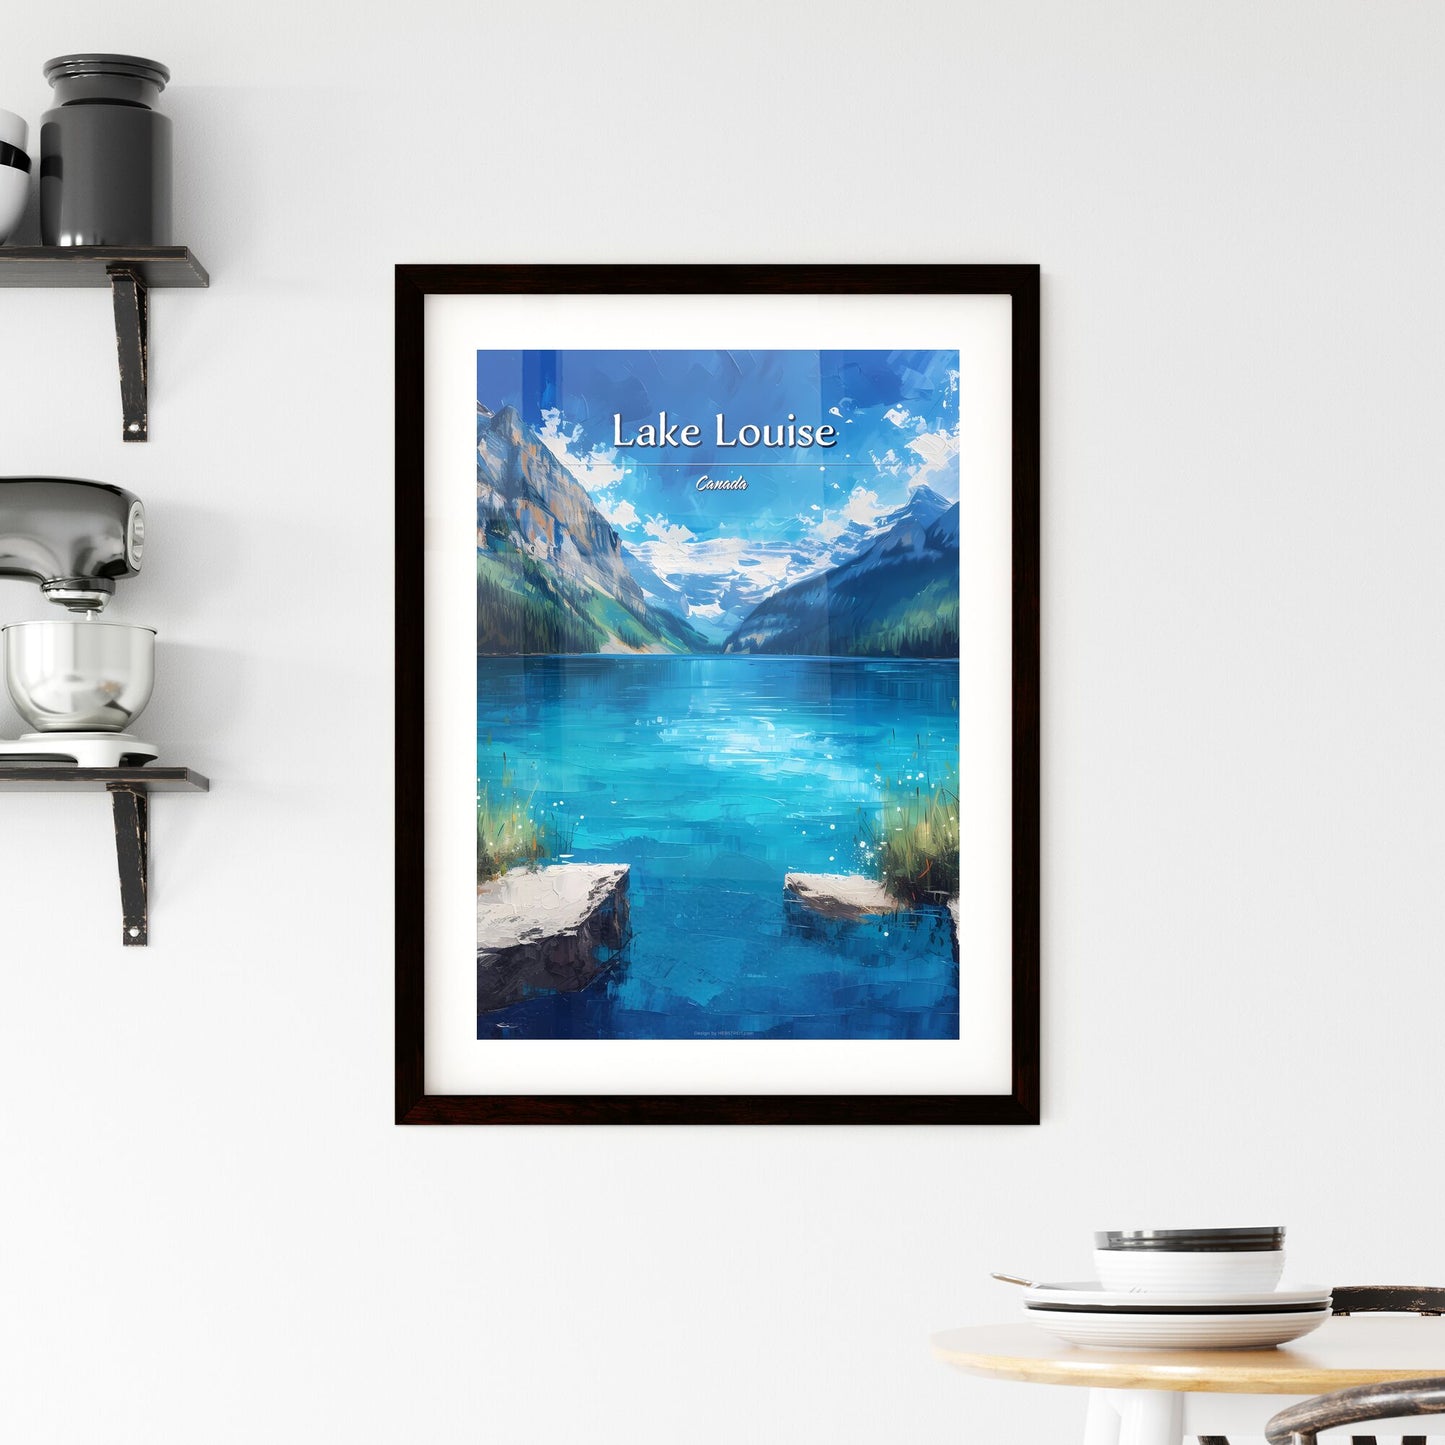 Lake Louise, Canada - Art print of a close up of a dna Default Title